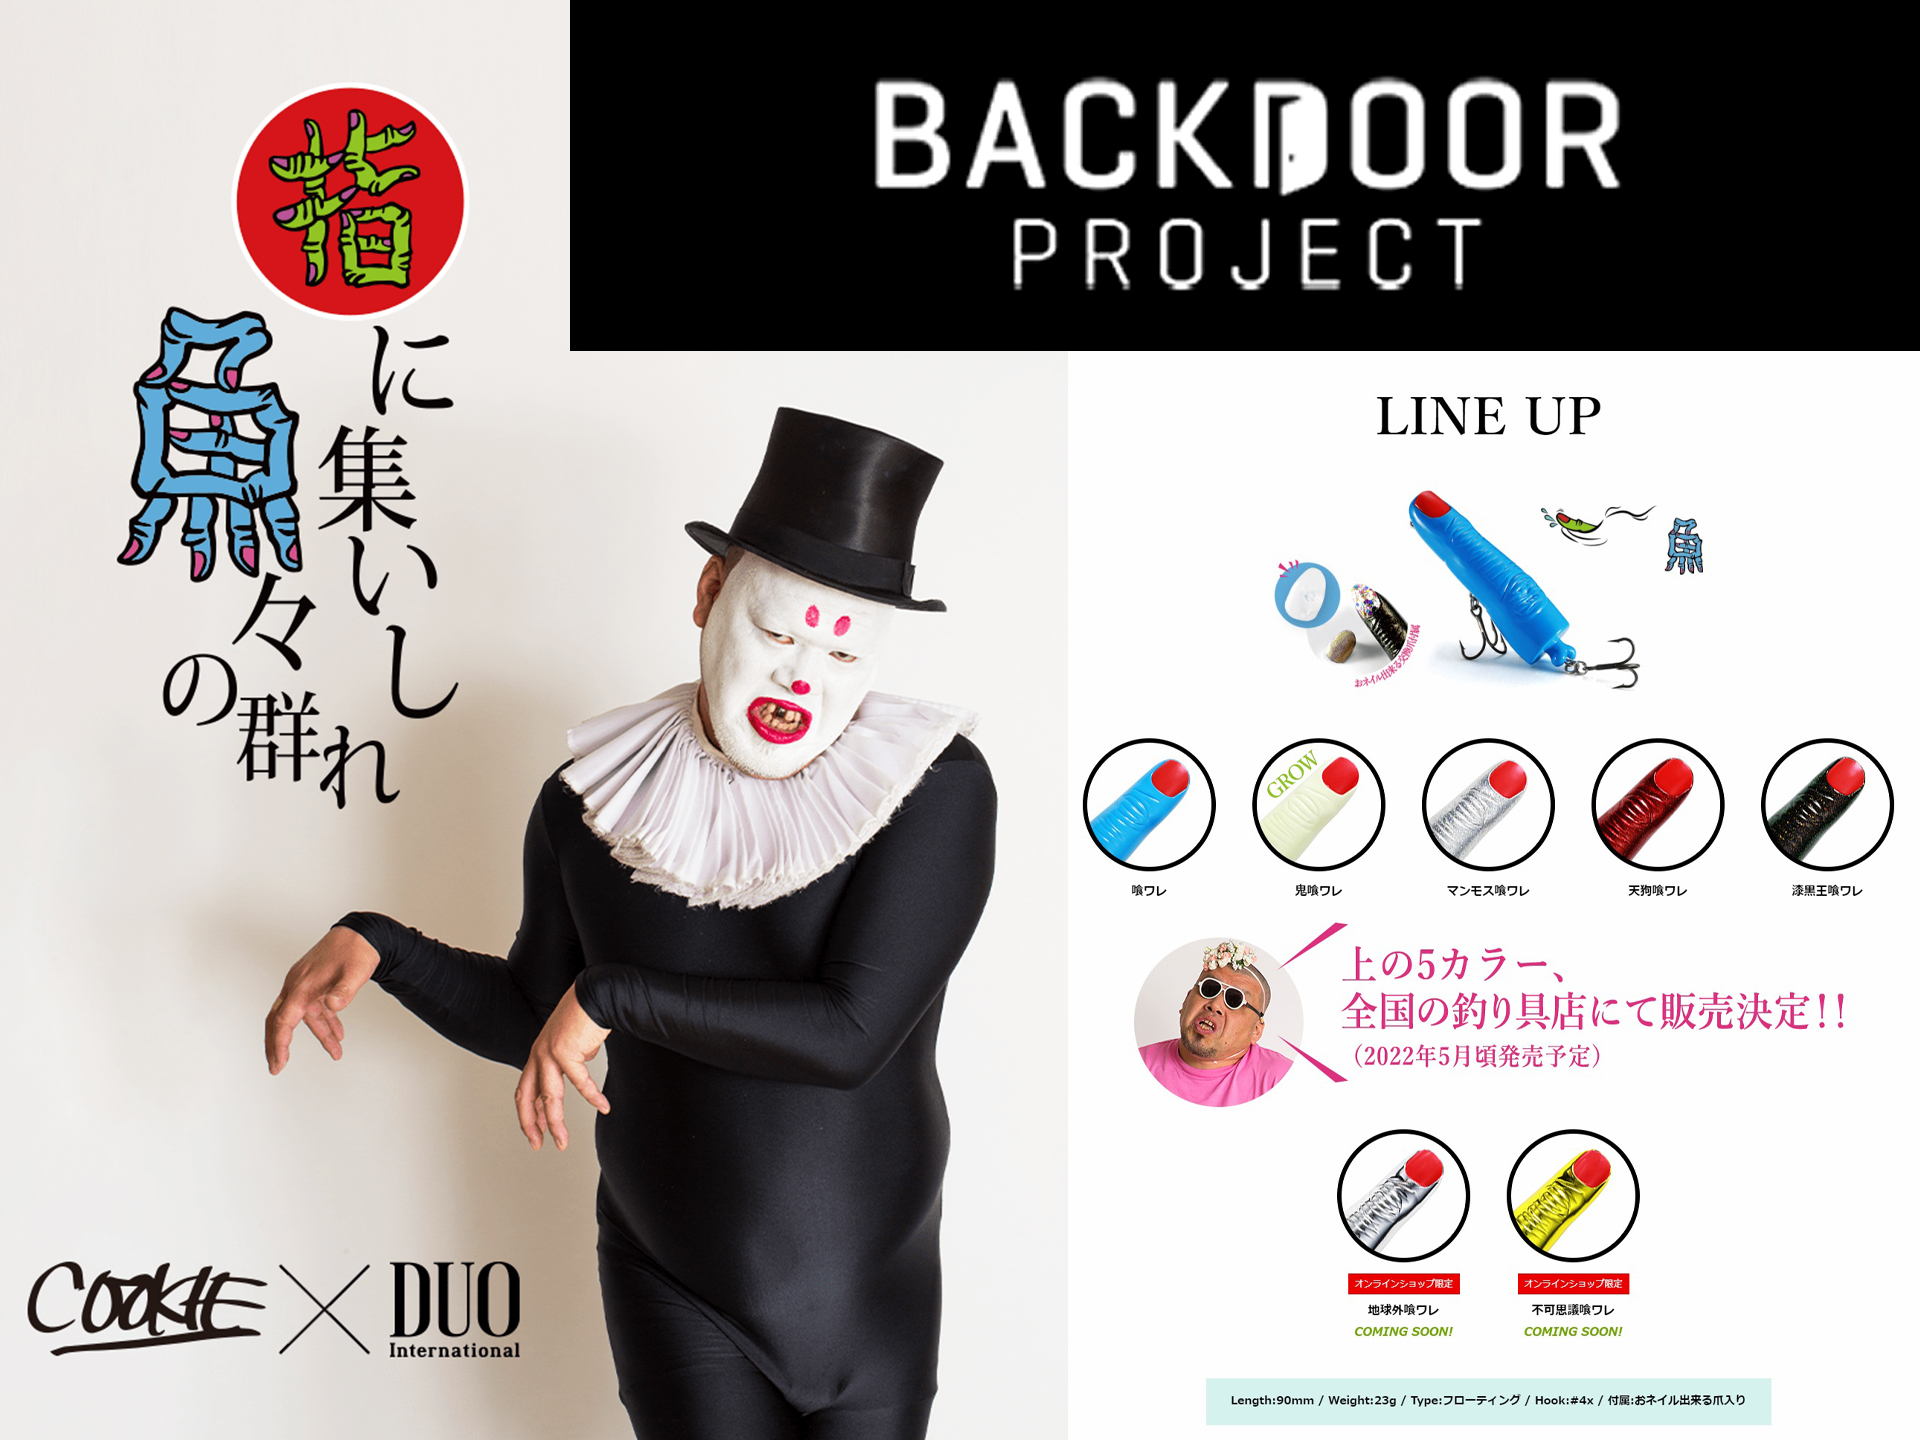 DUO】くっきー！とコラボルアー開発。「BACKDOOR PROJECT」第２弾、５ ...